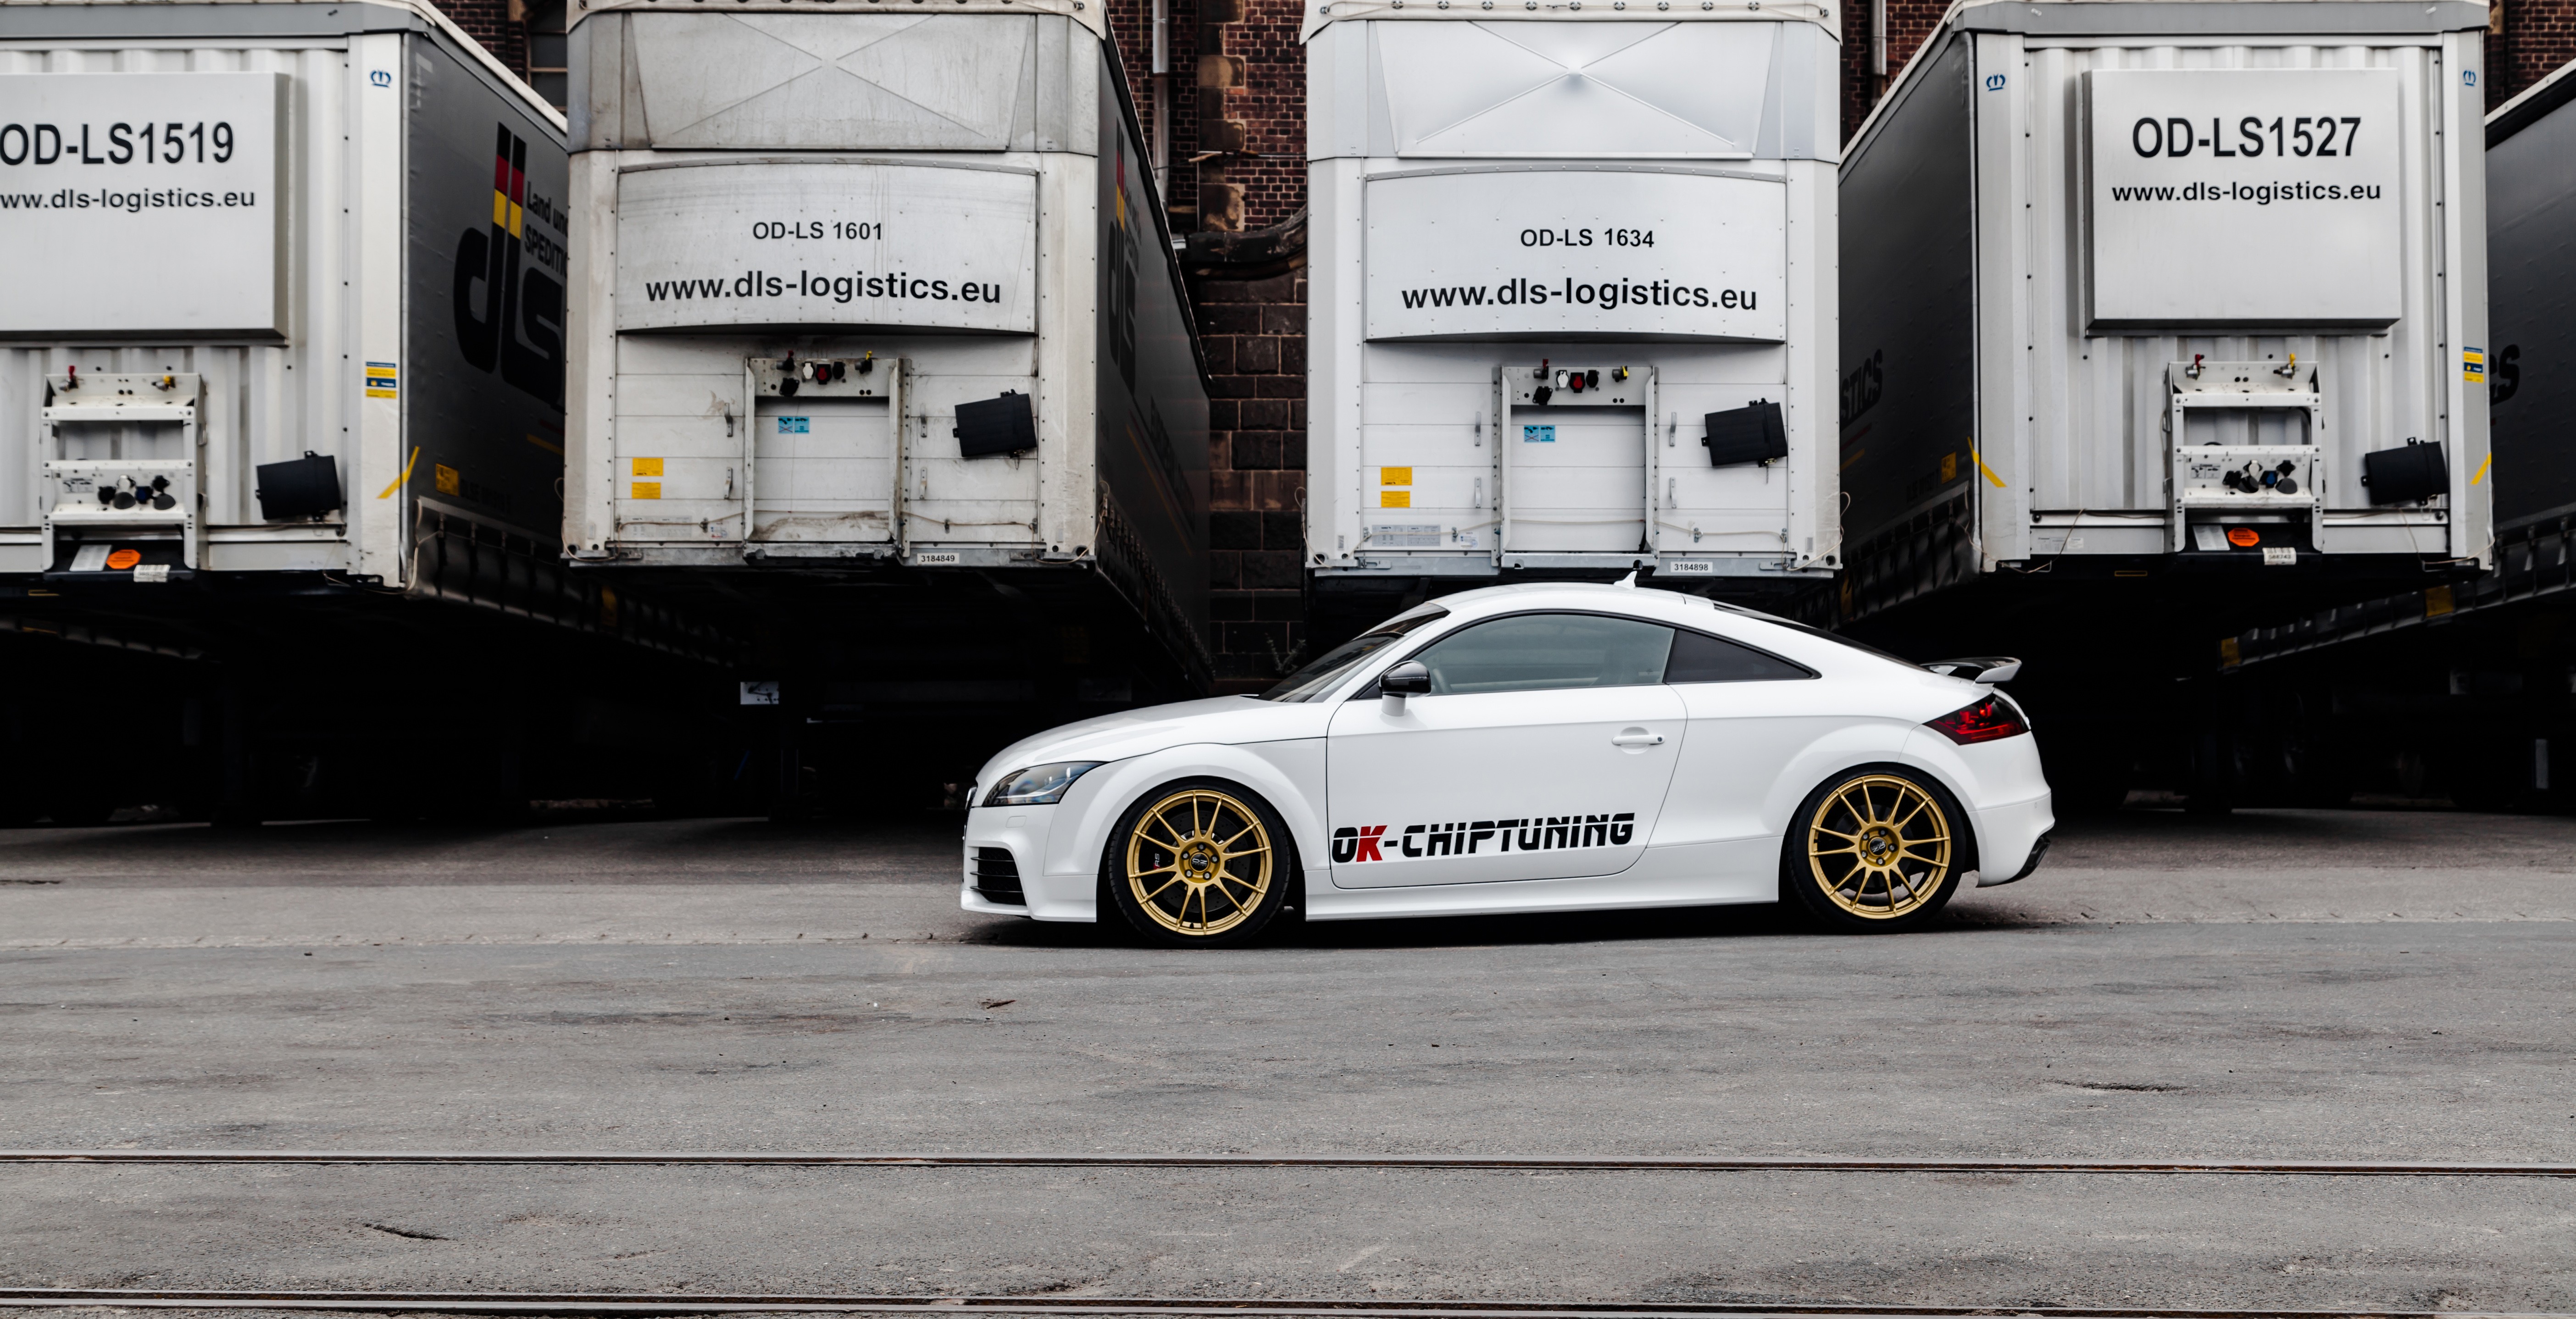 General 5616x2876 car Audi Audi TT colored wheels side view vehicle white cars German cars Volkswagen Group coupe